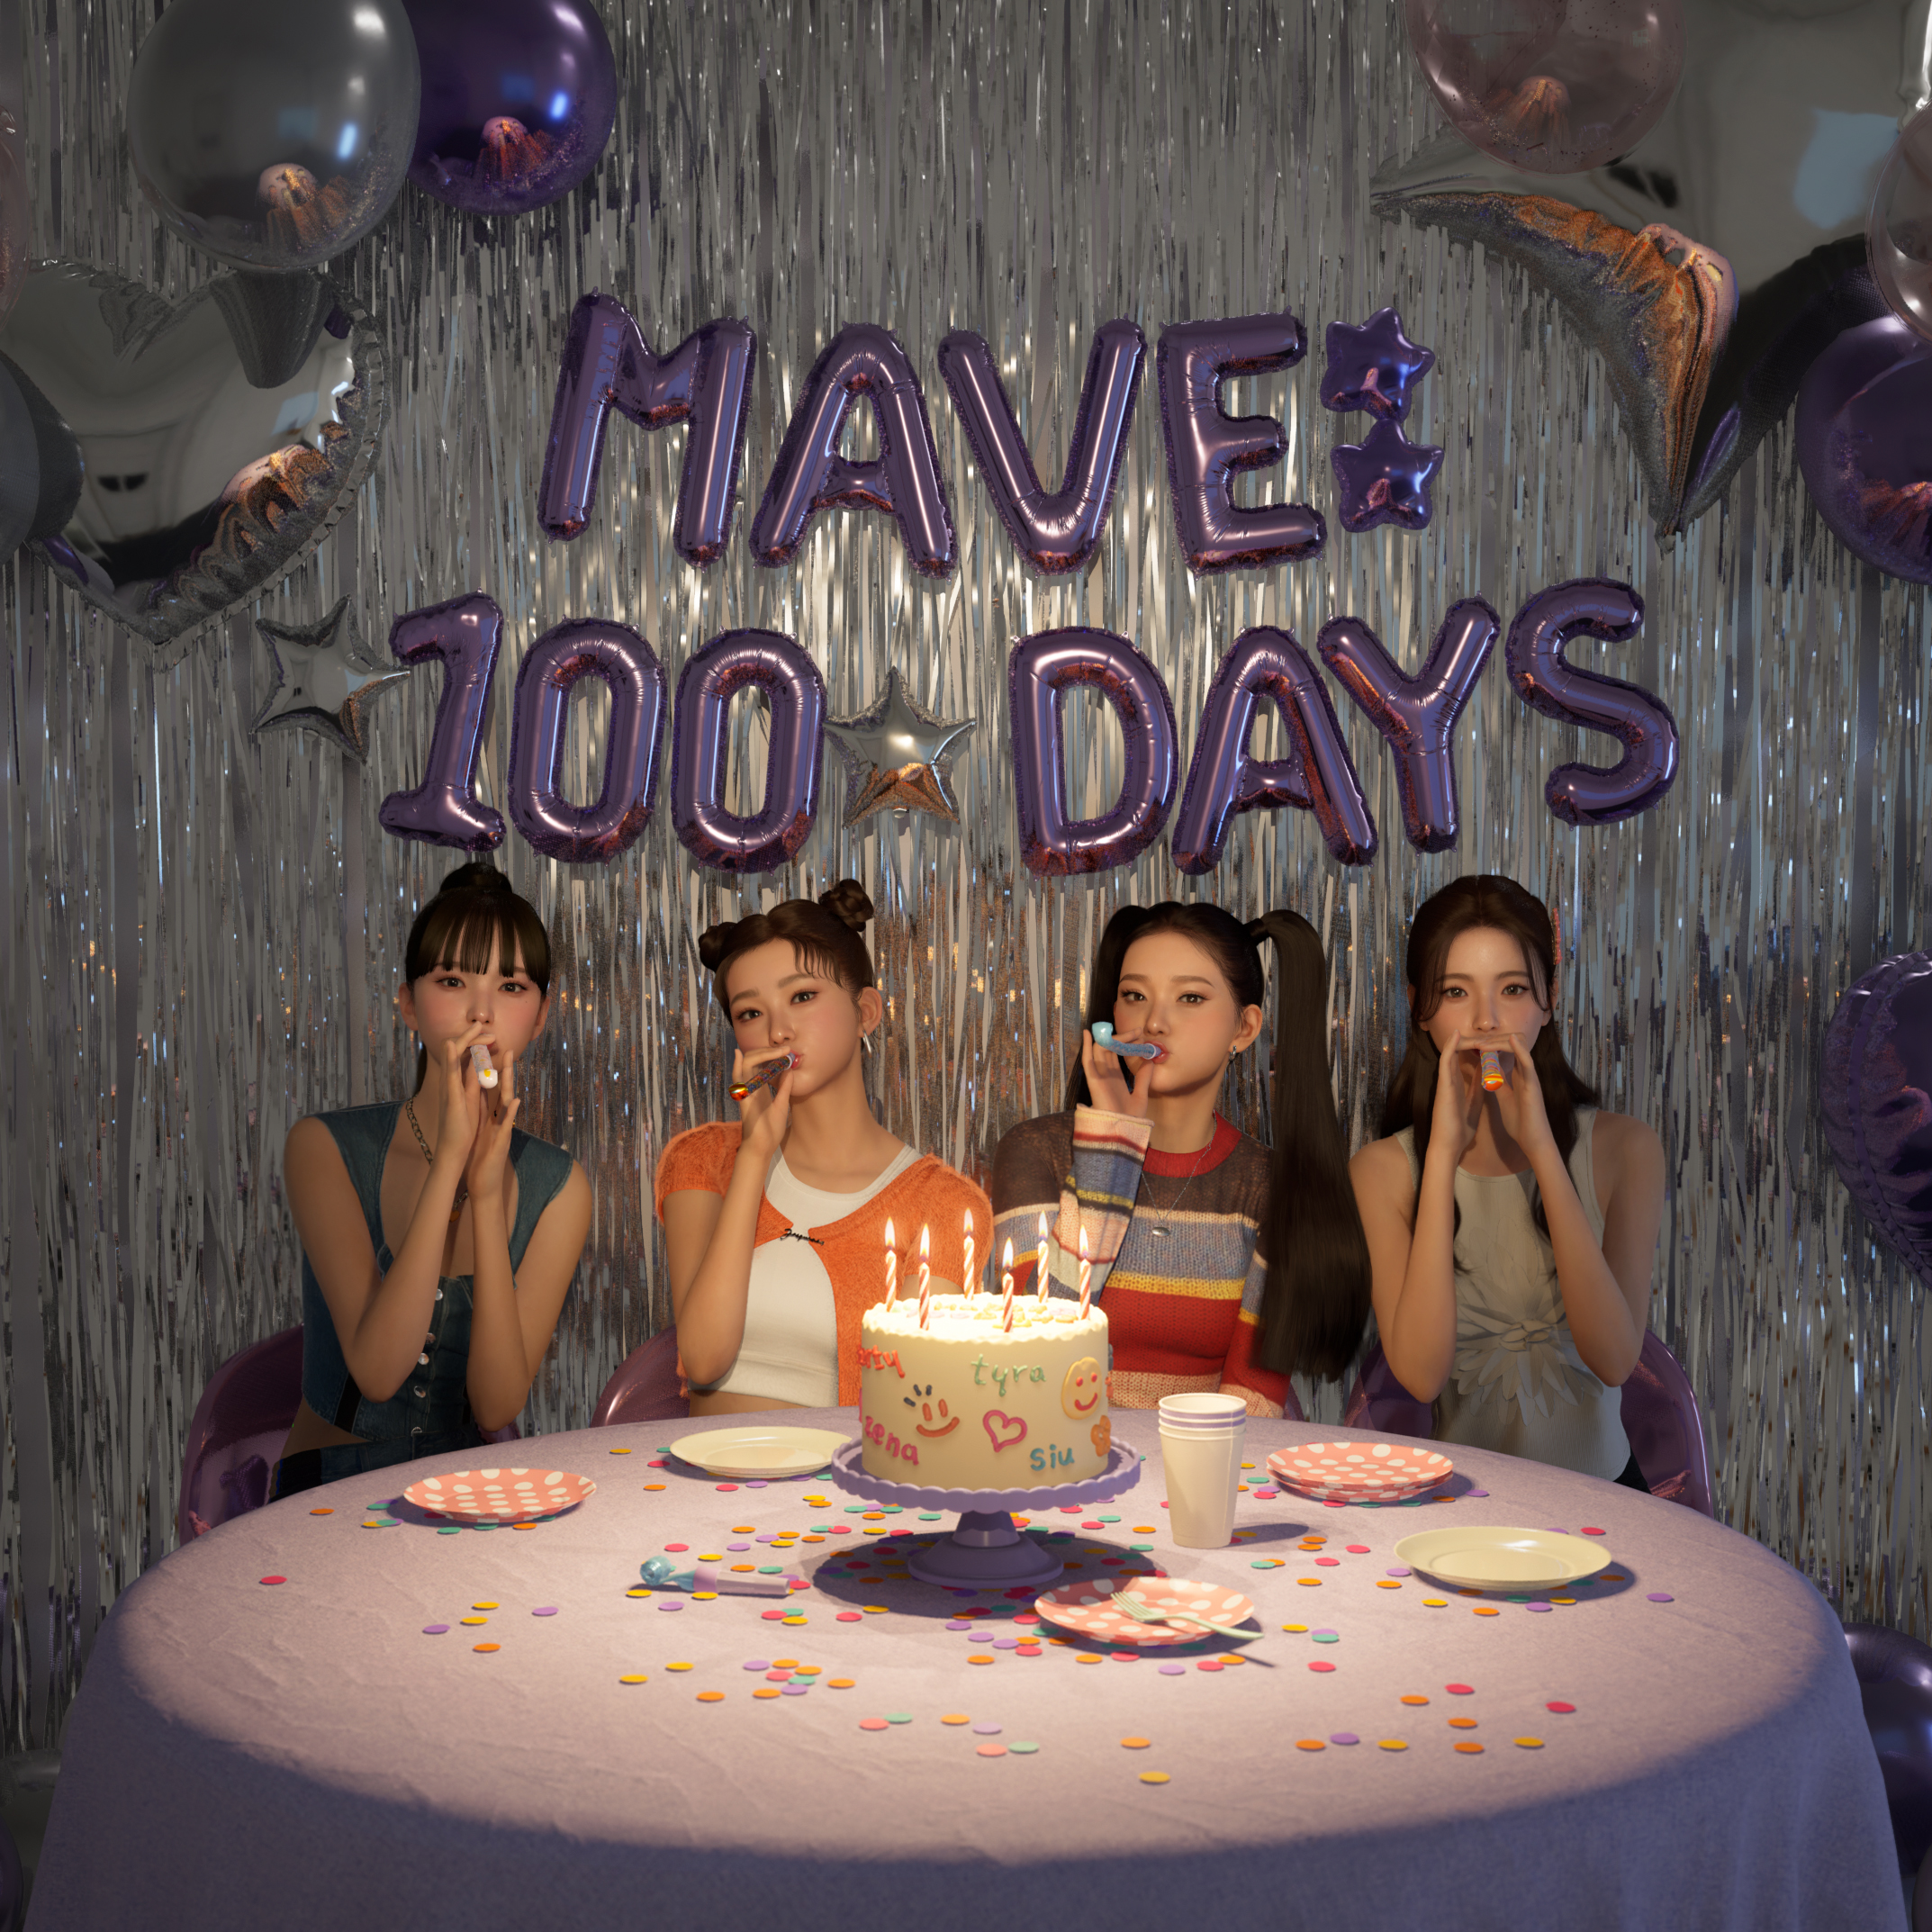 This is MAVE: the K-pop avatar group with millions of views, Culture